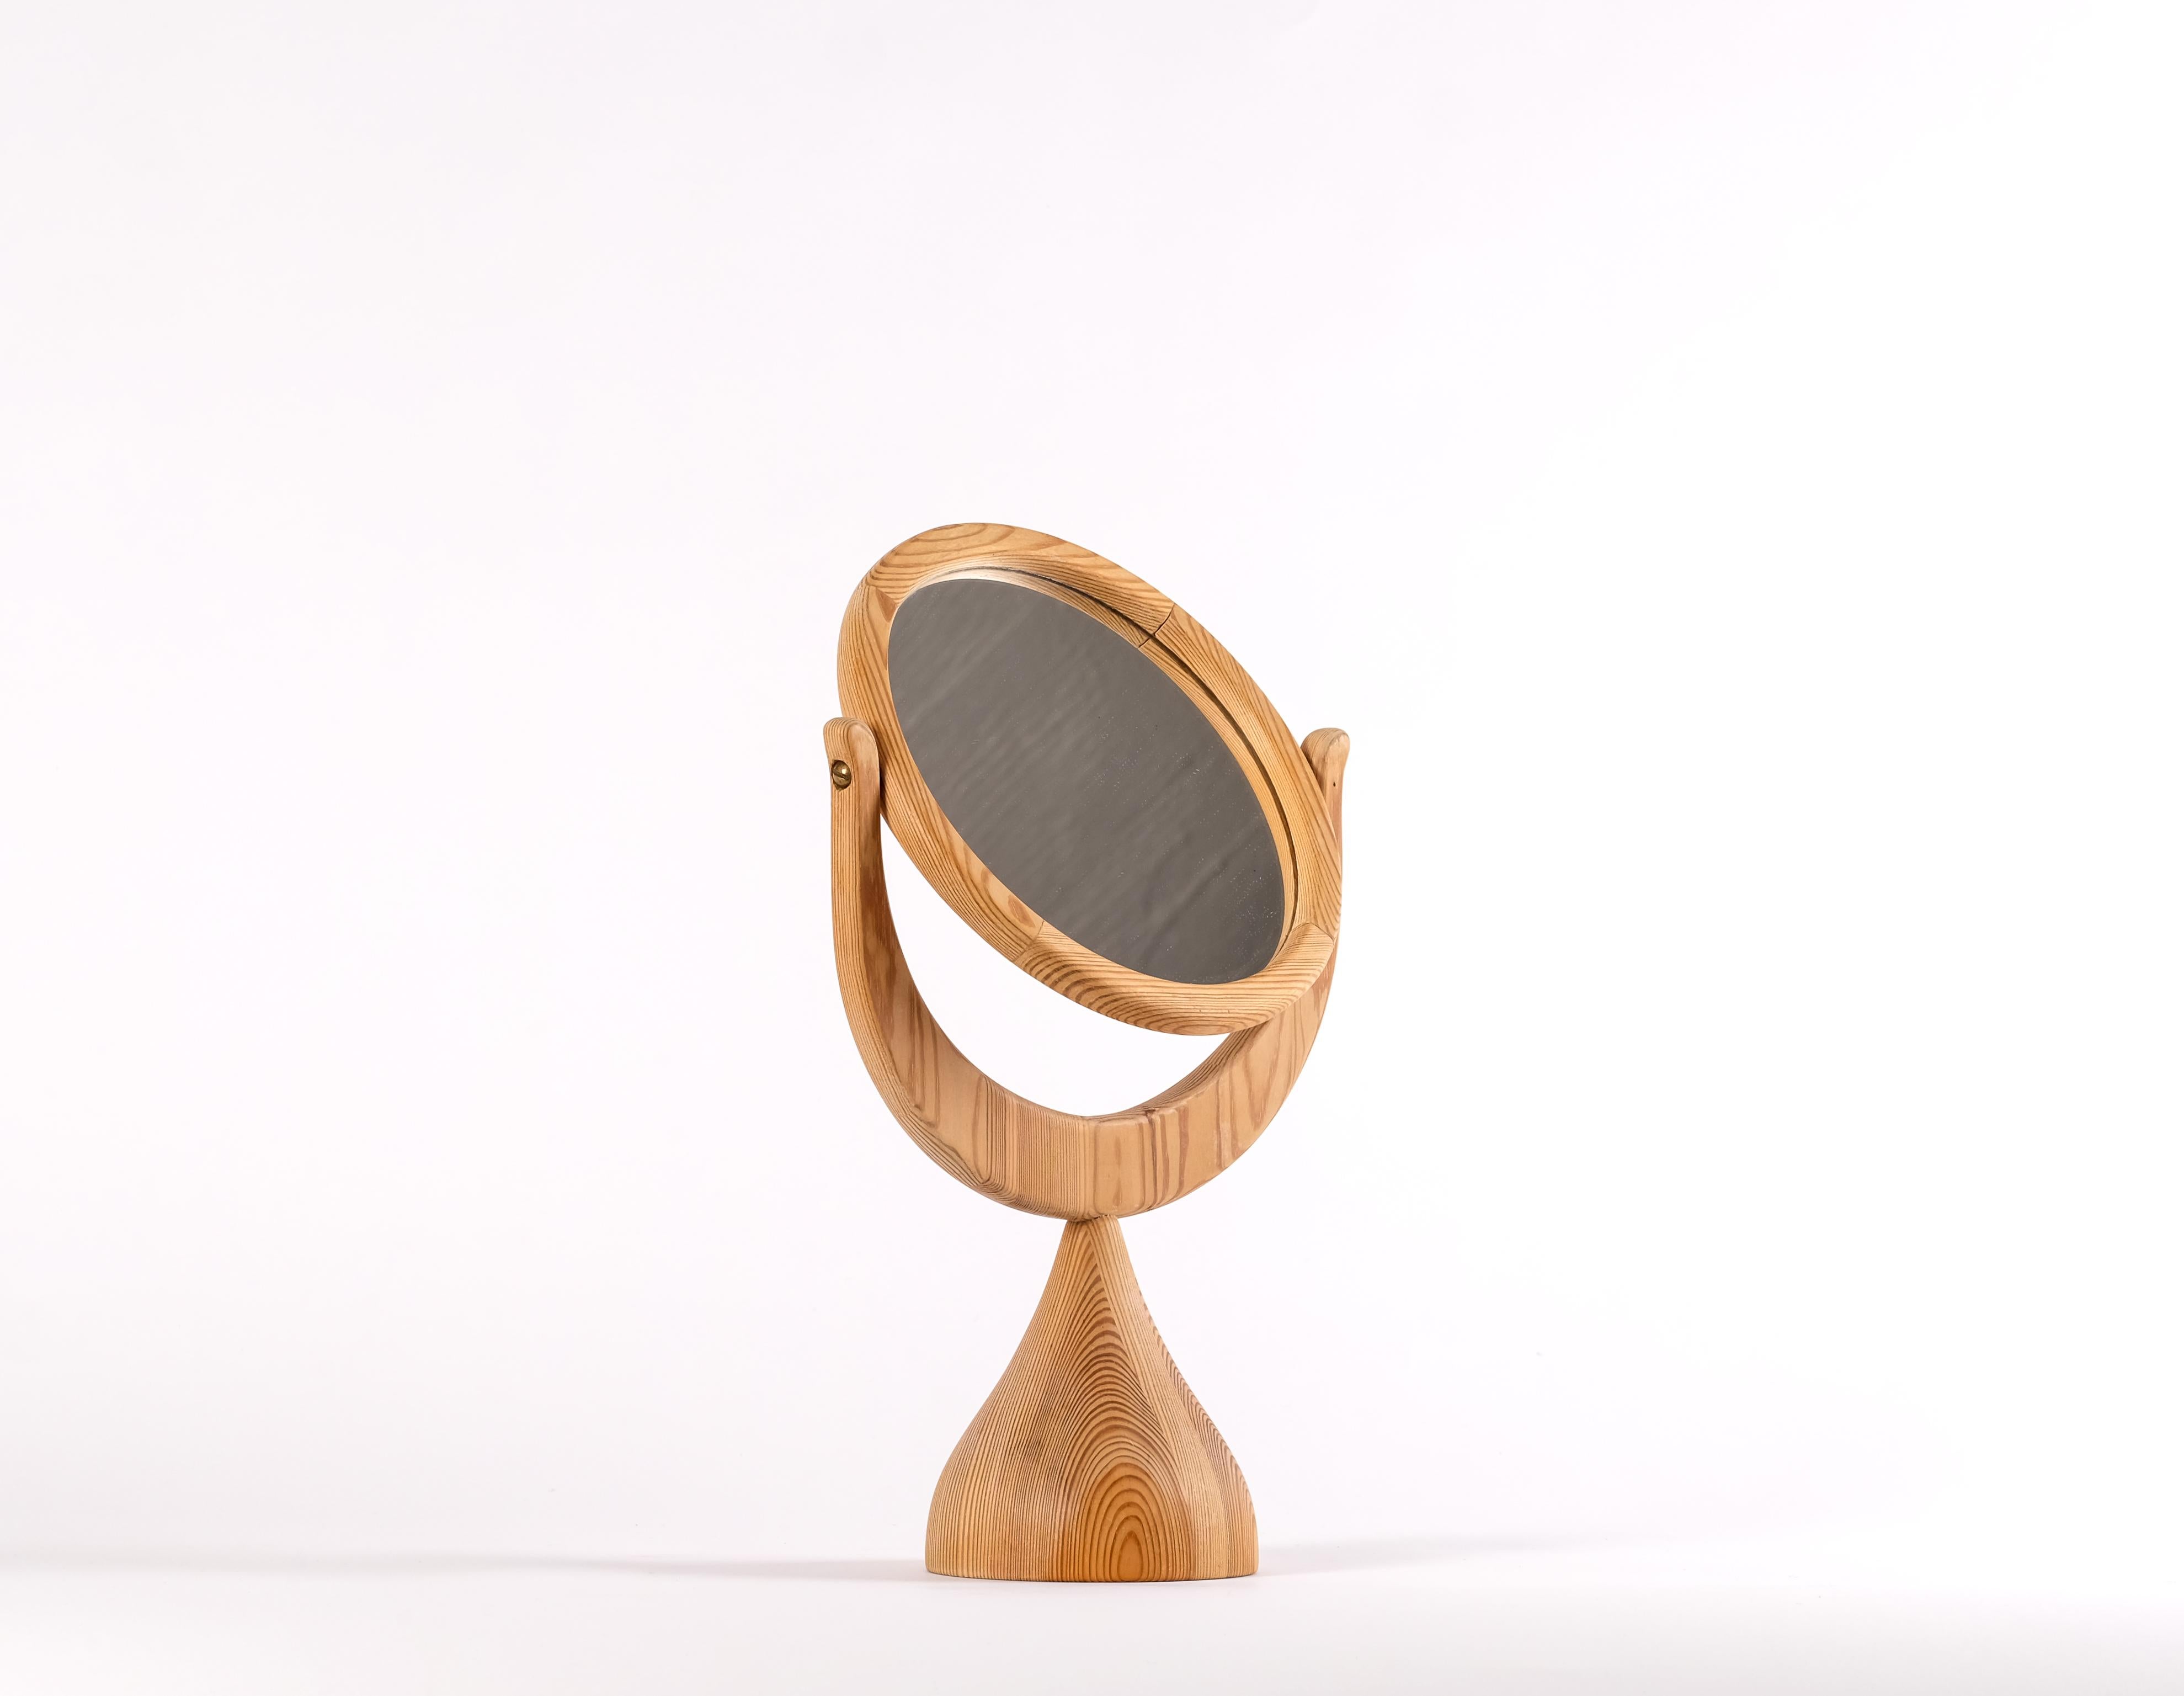 Table mirror in pine designed by Erik Hoglund, produced by Boda Trä, Sweden, 1950s.